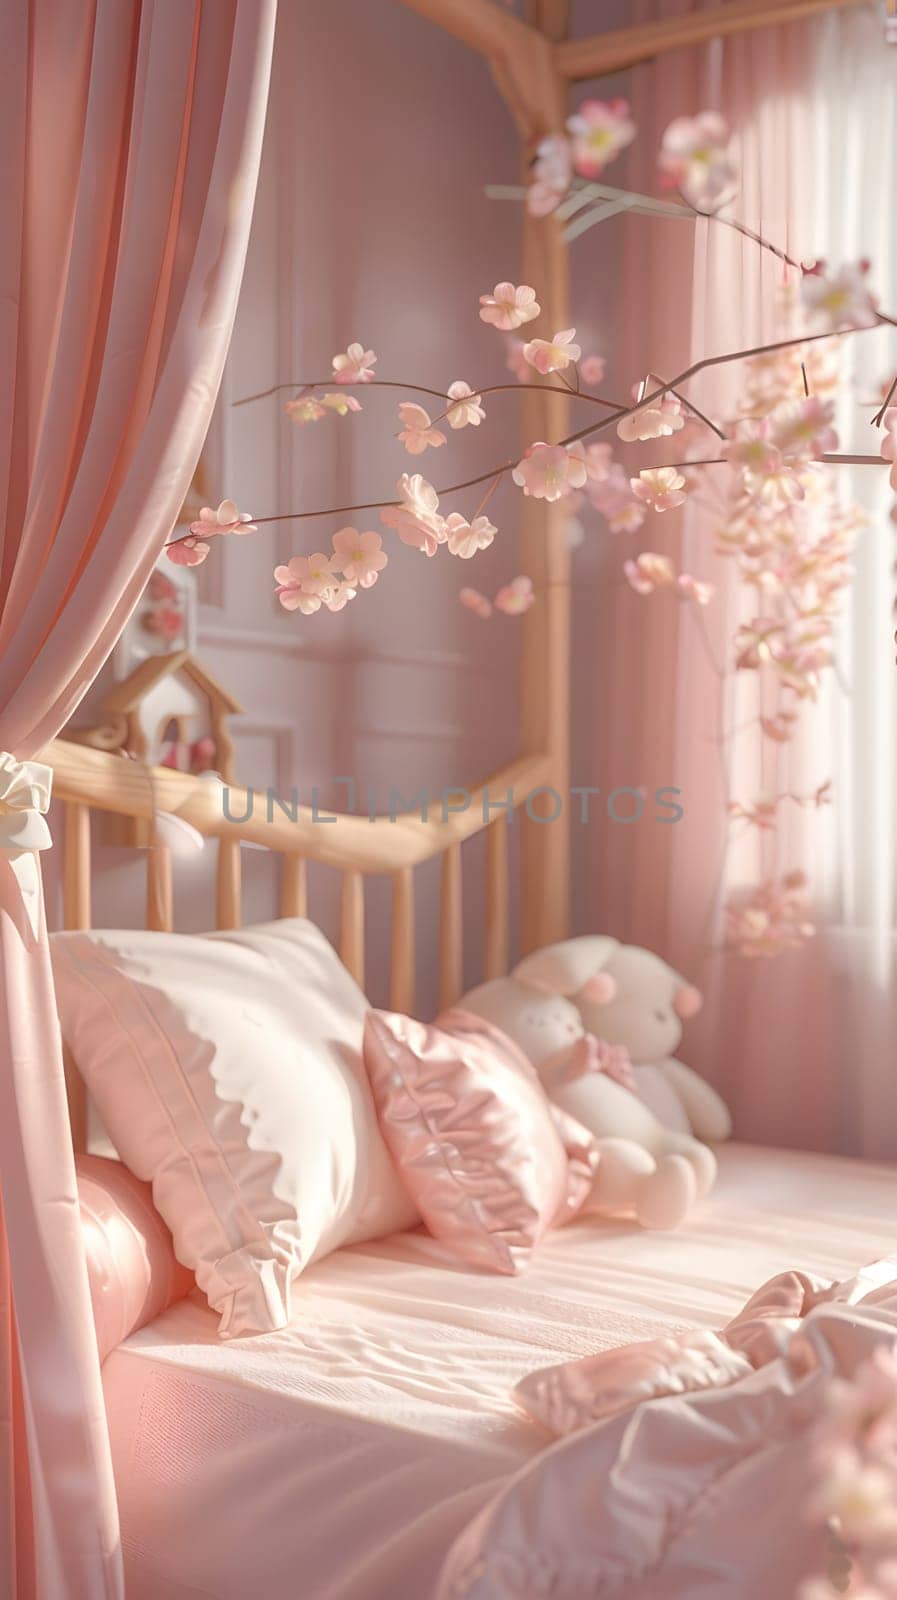 A pink bedroom with a canopy bed, hardwood furniture, and flowers hanging from the ceiling. The interior design features textile curtains, a cozy chair, and a wooden table for added comfort